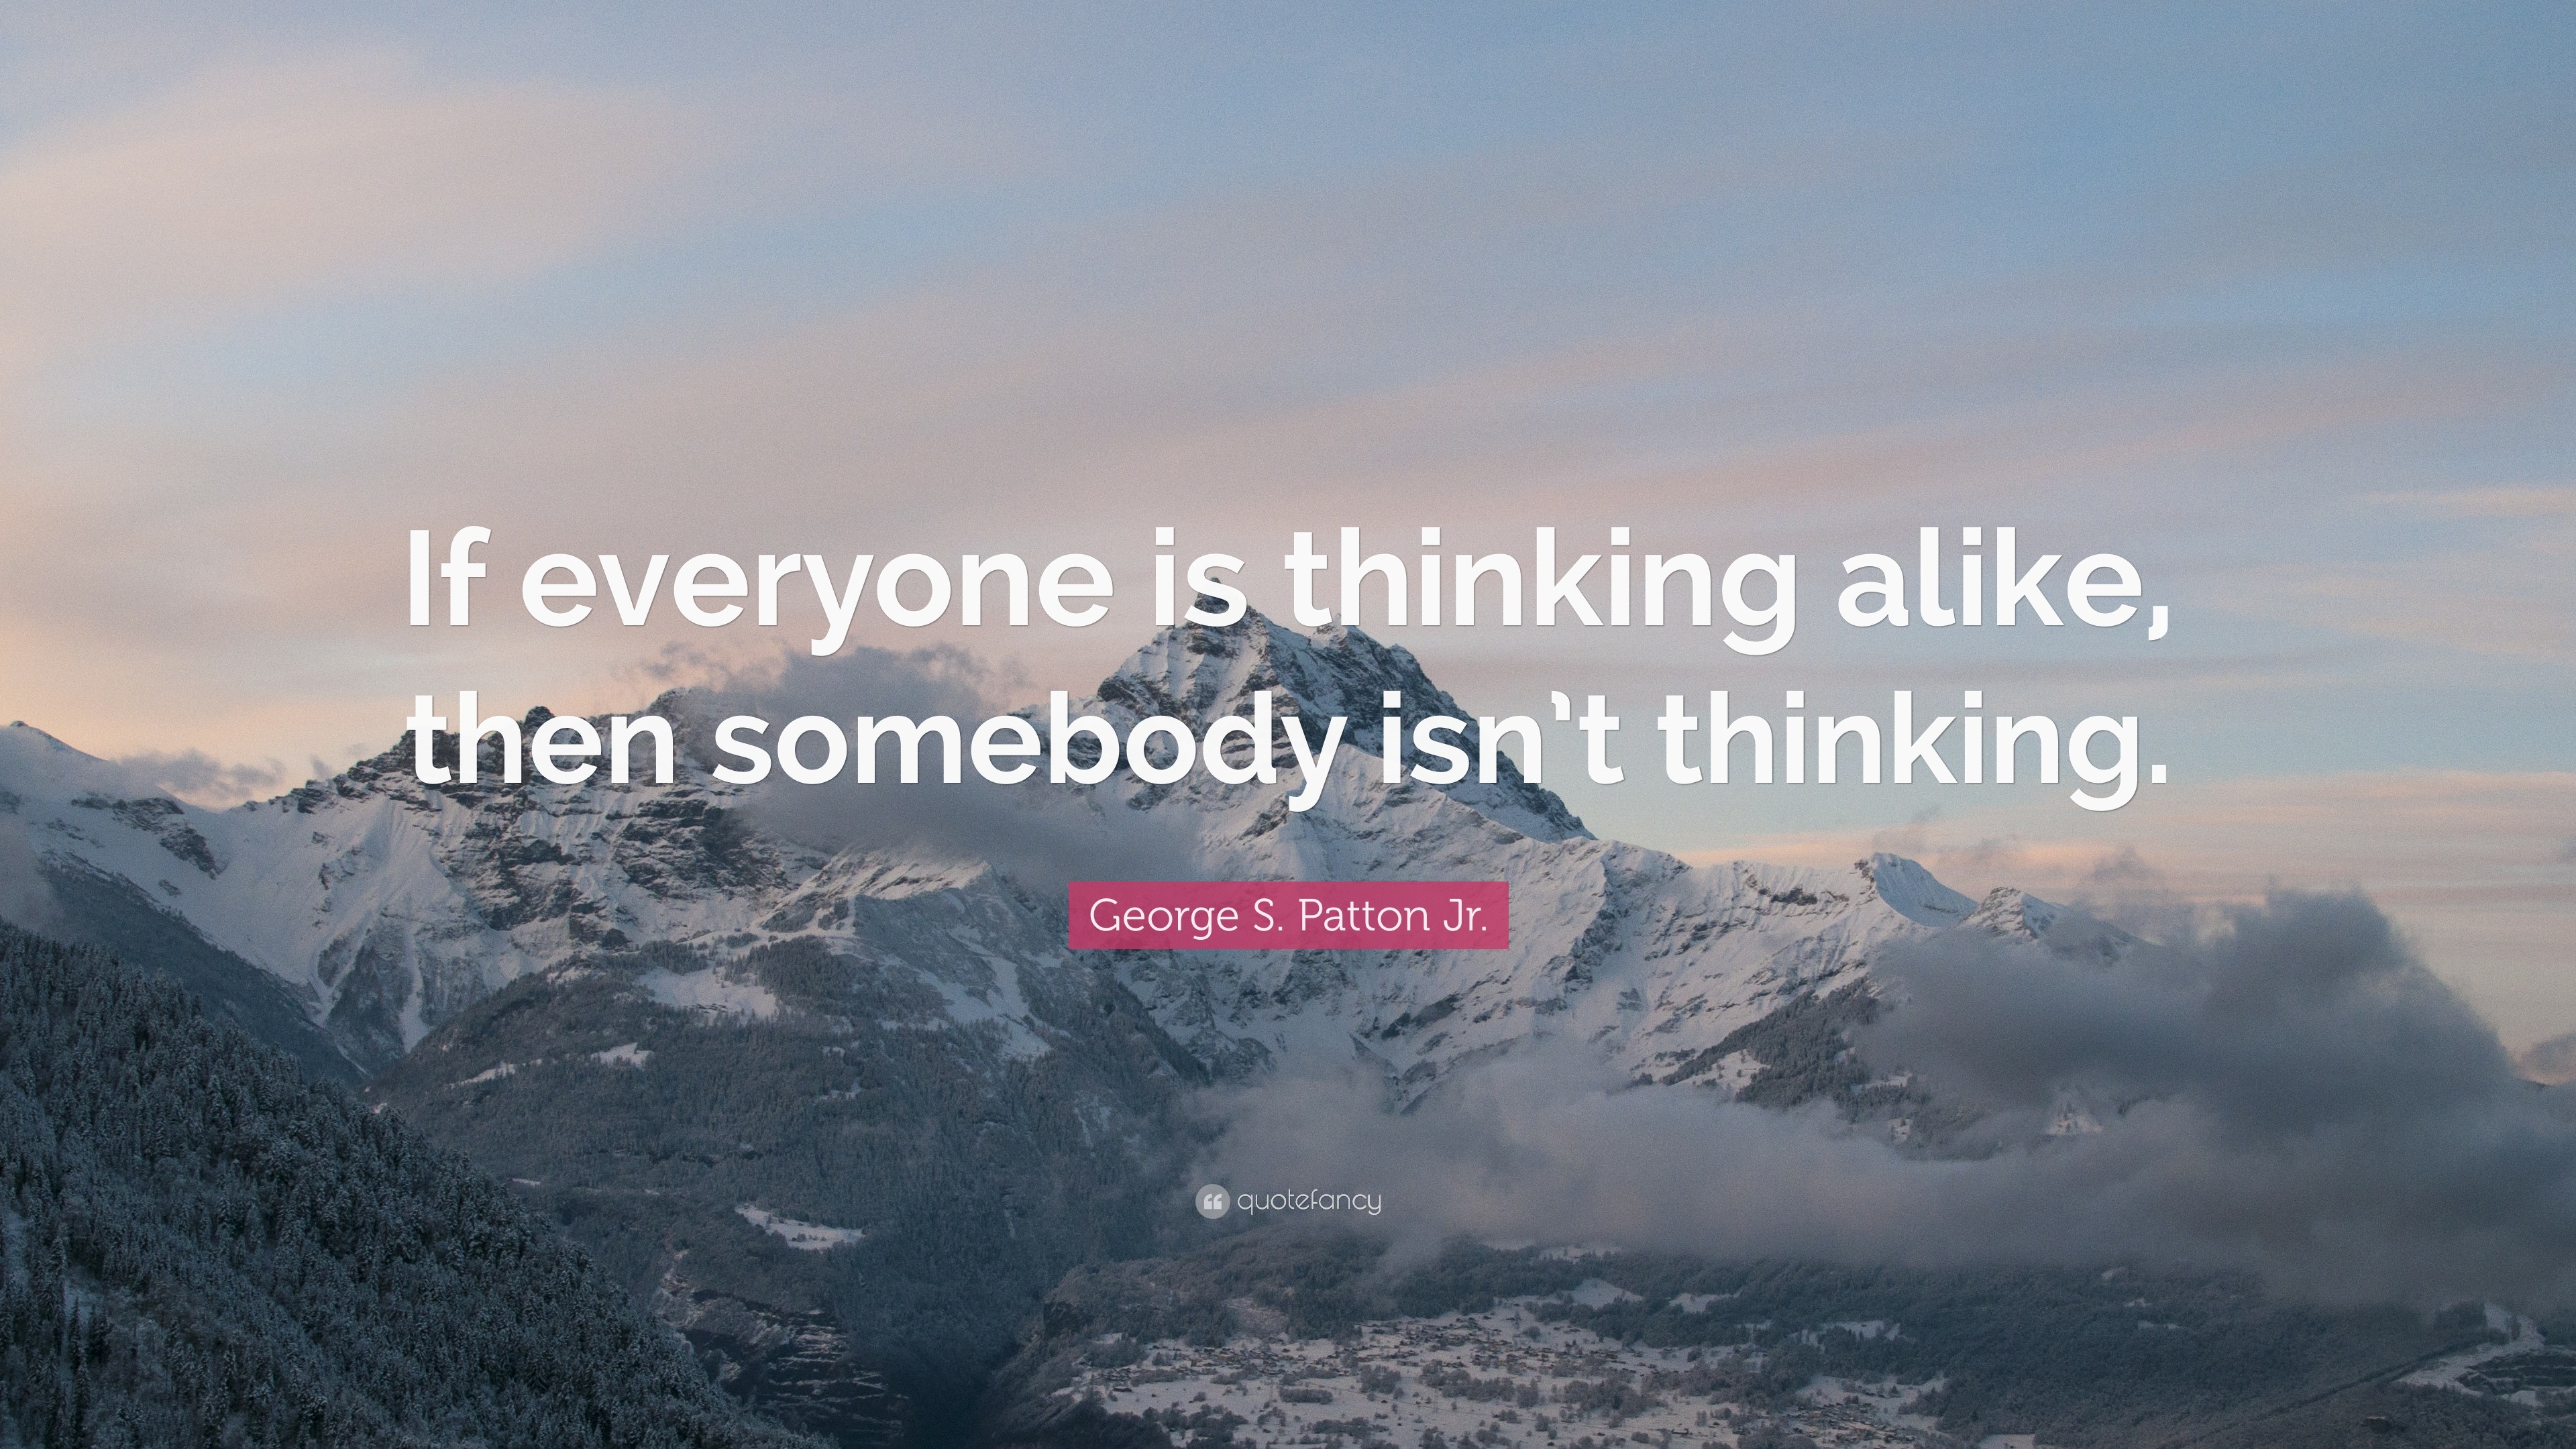 George S. Patton Jr. Quote: “If everyone is thinking alike, then ...